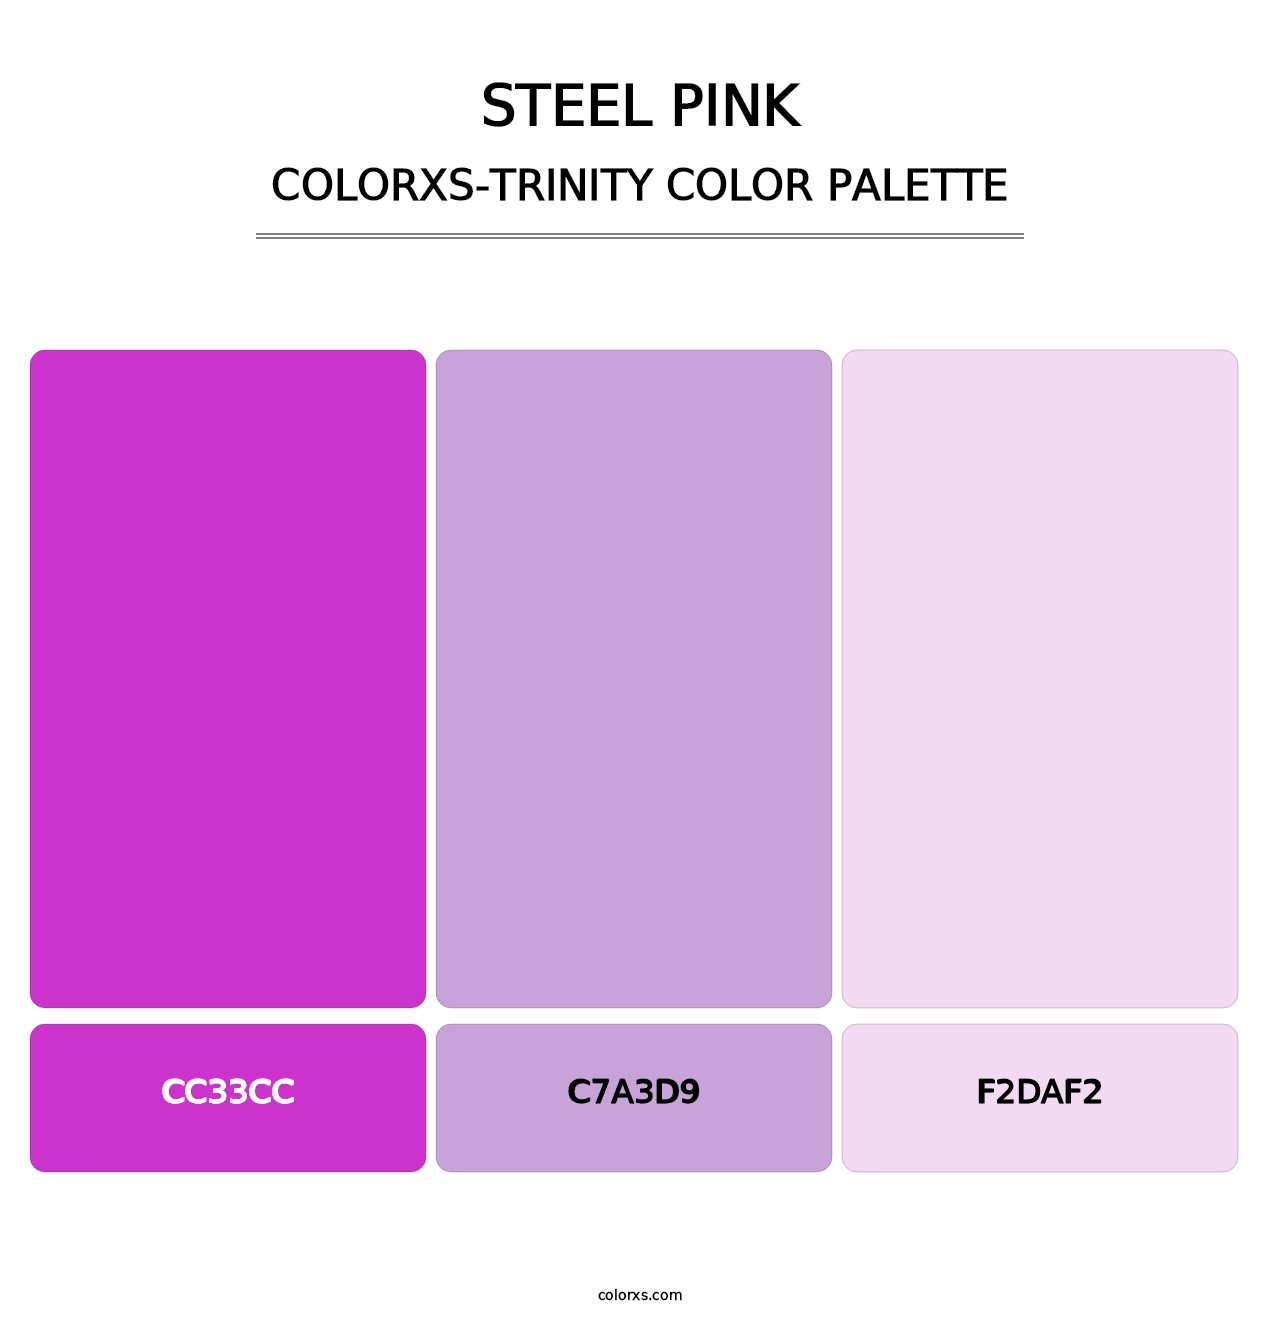 Steel Pink - Colorxs Trinity Palette